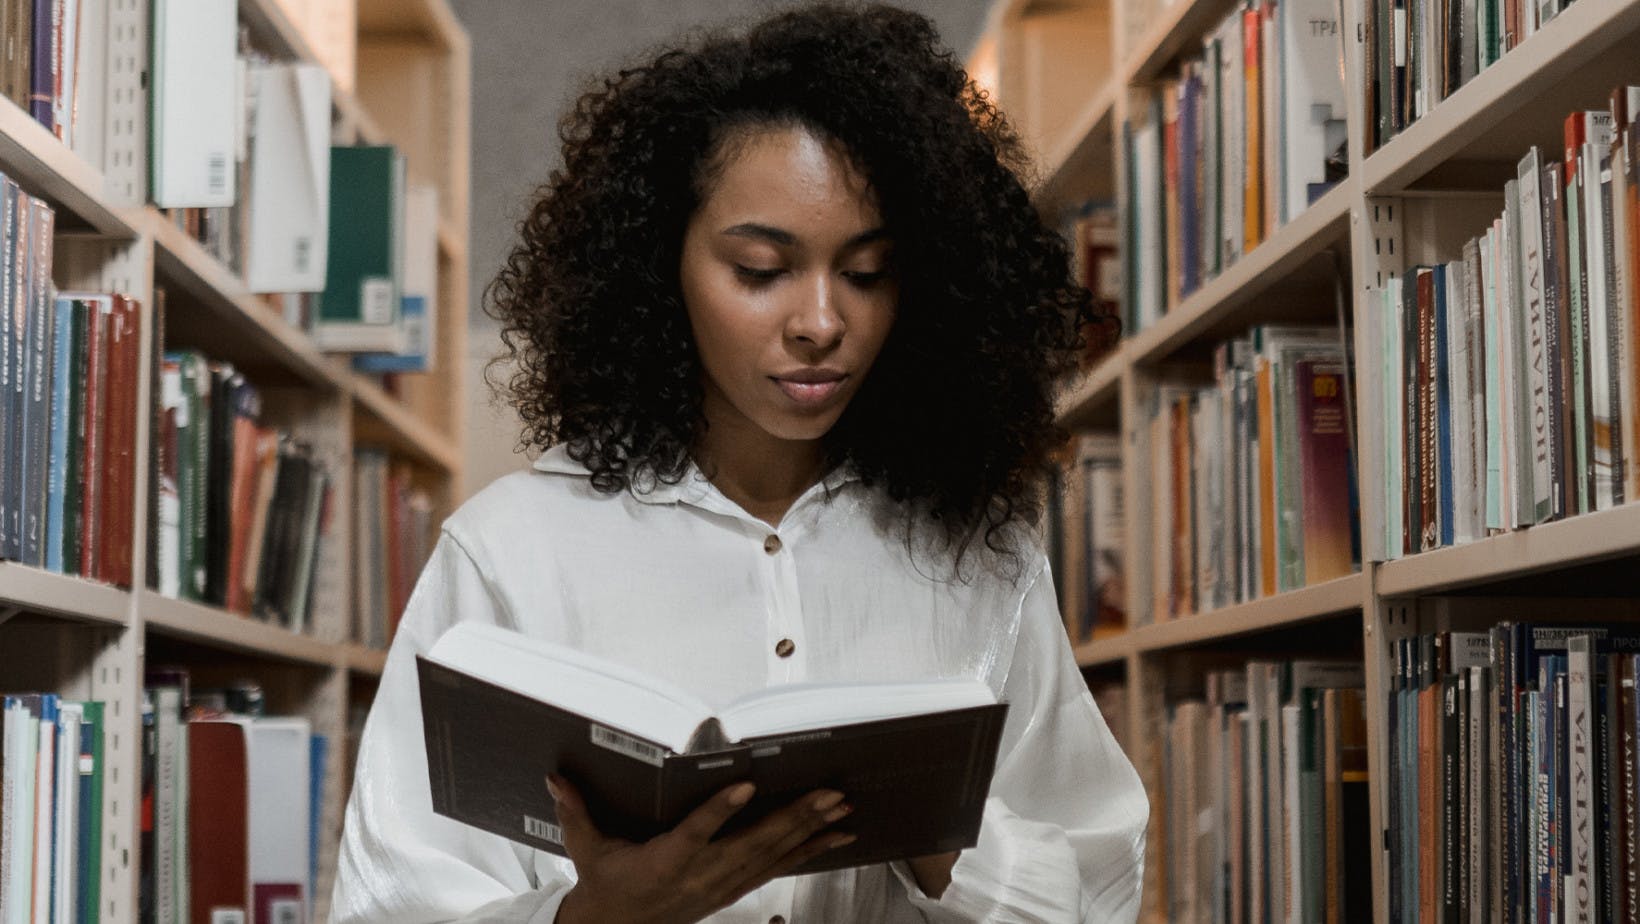 Black woman reading a literature book in a library aisle